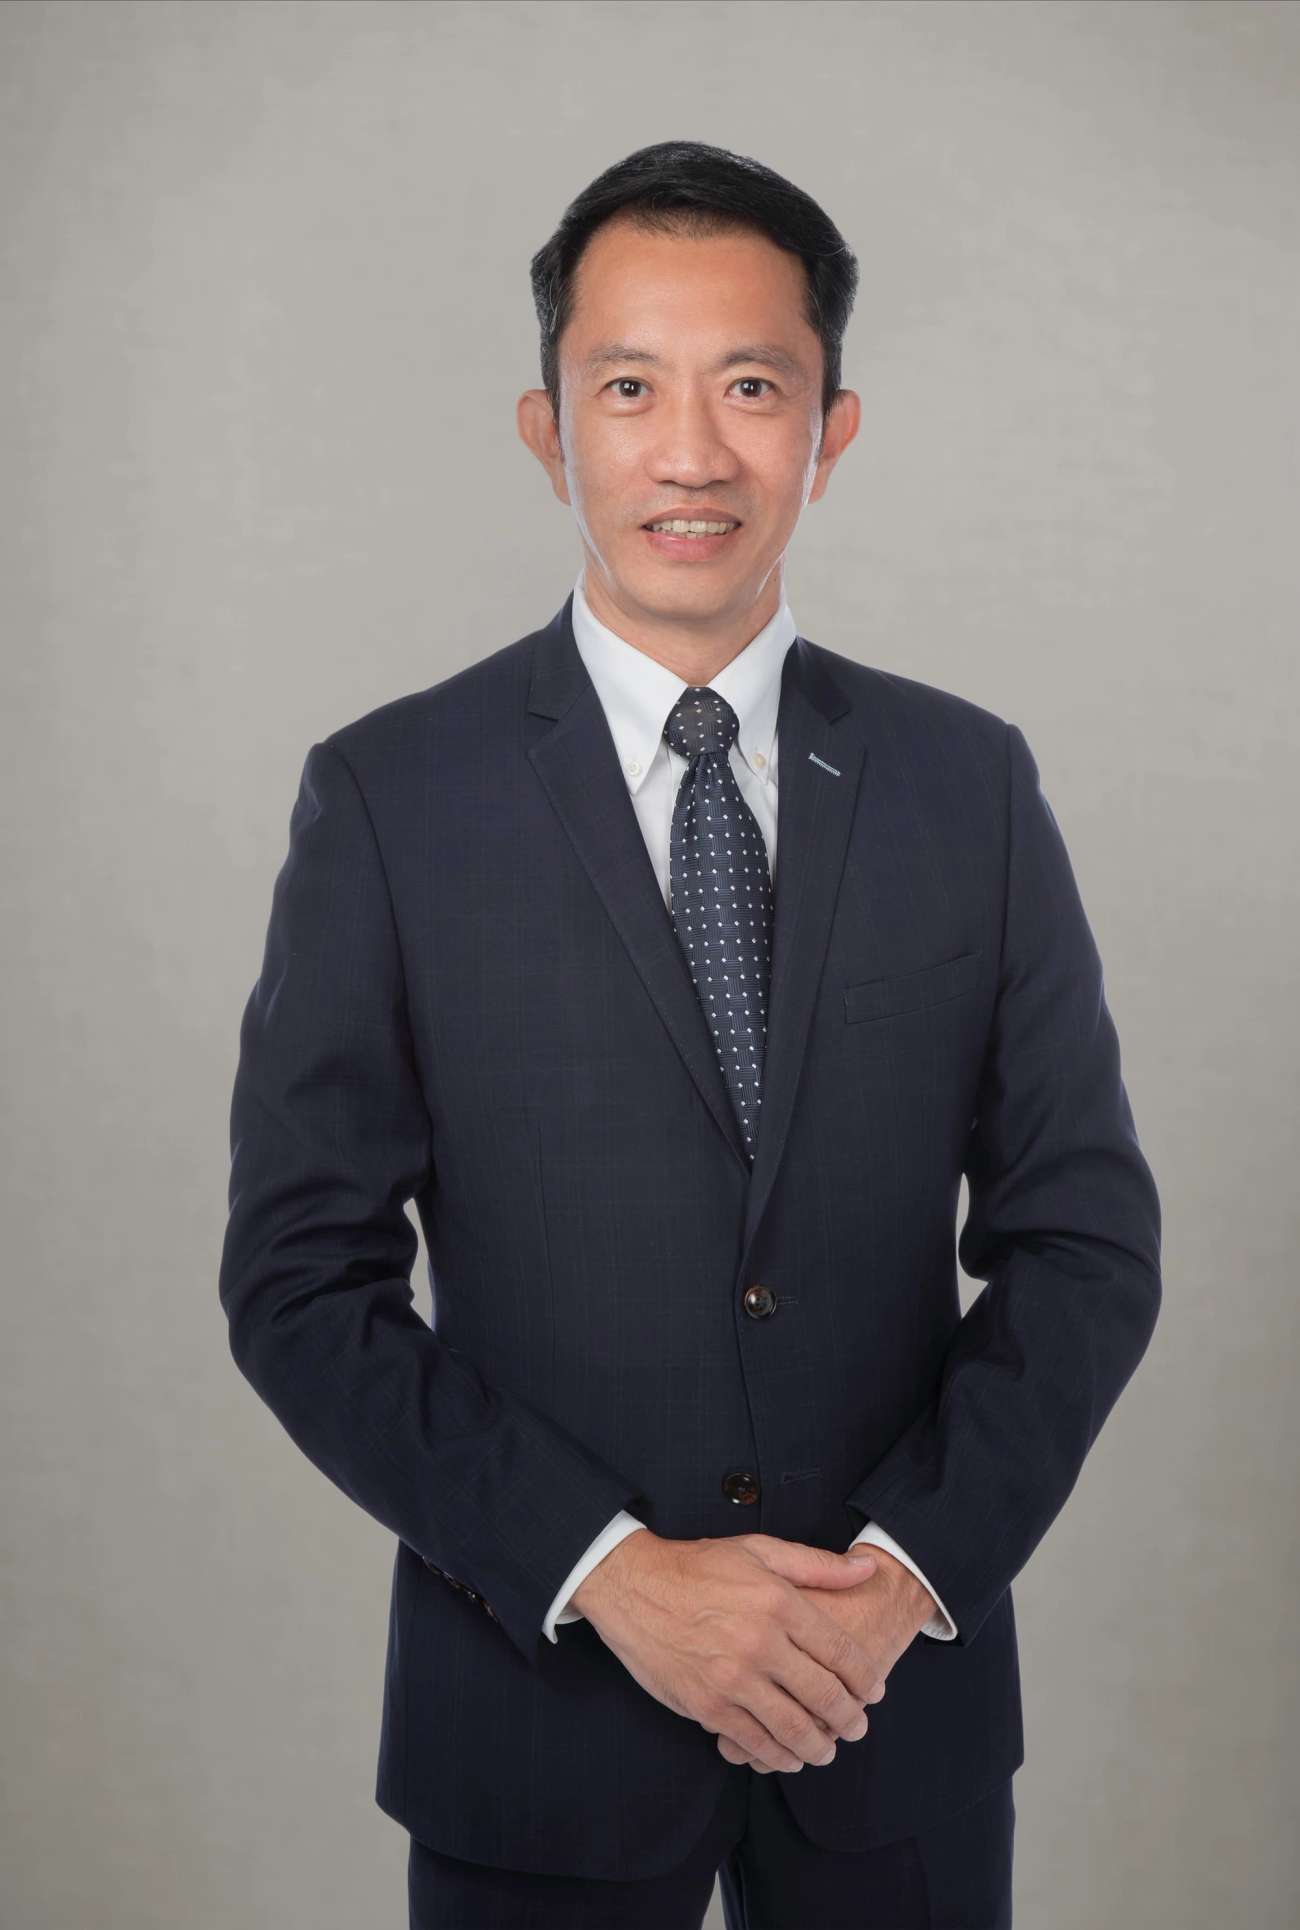 Man with short black hair in navy suit both hands in front of his body